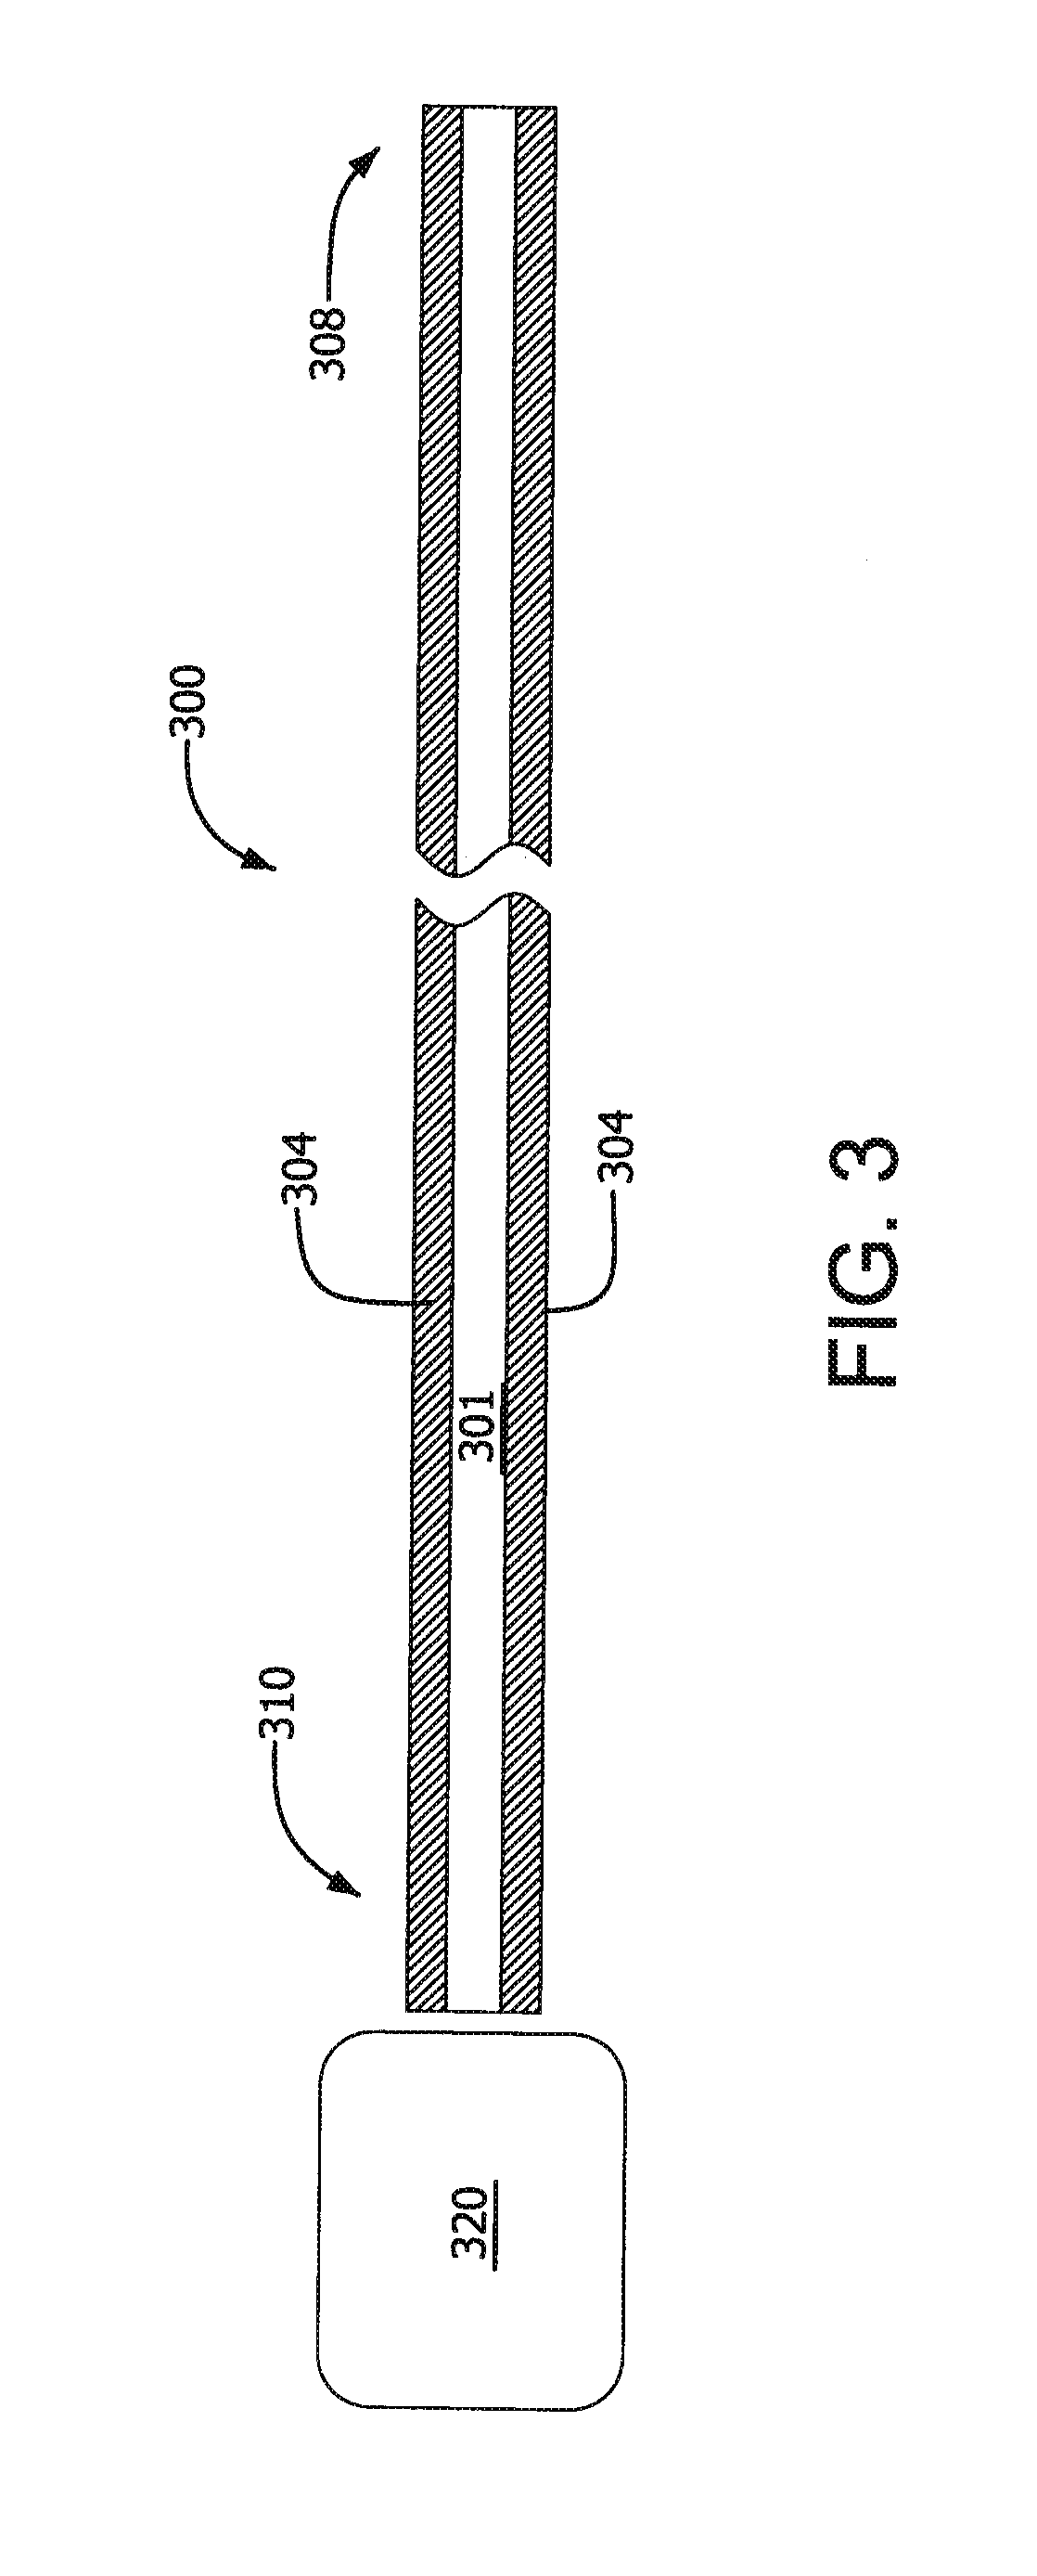 Methods and apparatus for an adjustable stiffness catheter